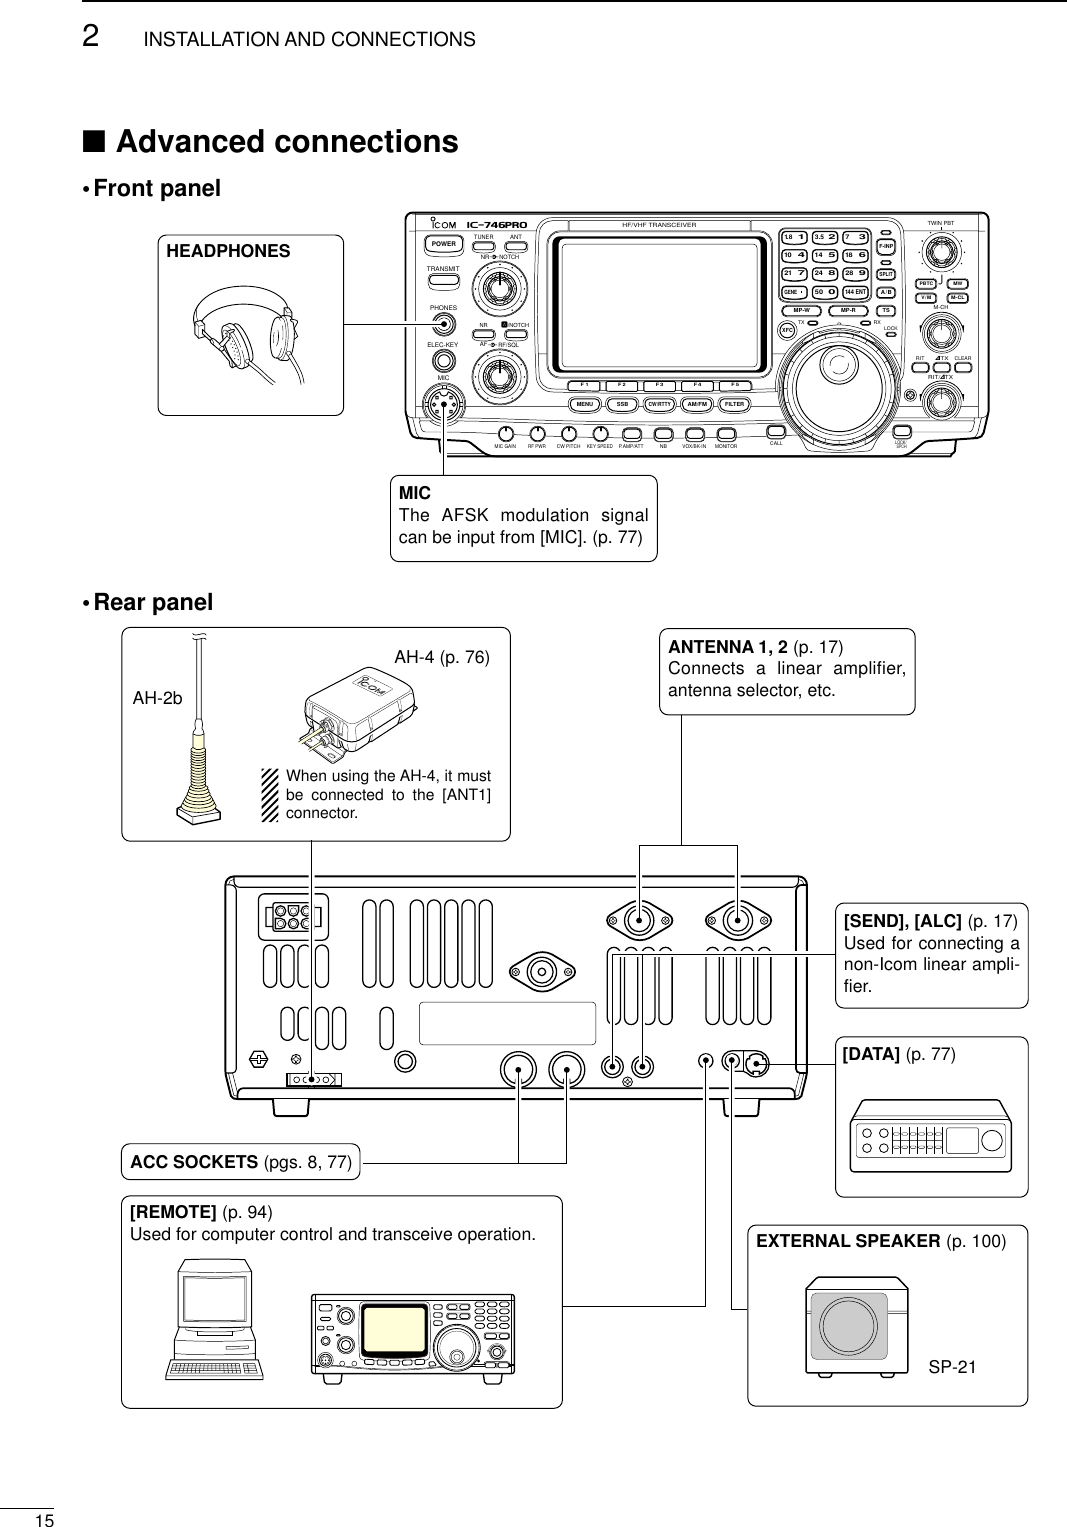 ■Advanced connections•Front panel•Rear panel152INSTALLATION AND CONNECTIONSPOWERTRANSMITPHONESELEC-KEYMICNRA/NOTCHTUNERANTHF/VHF TRANSCEIVERNRNOTCHAFMIC GAINRF PWRCW PITCHF 1F 2F 3F 4F 5XFCMP-WGENE5002172482891451041863.521.8173144ENTMP-RTX RX LOCKTWIN PBTM-CHRITCLEAR∂TXRIT/∂TXTSSPLITPBTCF-INPA/BV/MMWM-CLKEY SPEEDP.AMP/ATTNBVOX/BK-INMONITORCALLLOCK/SPCHRF/SQLi746PROMENU SSBCW/RTTYAM/FMFILTERHEADPHONESMICThe AFSK modulation signal can be input from [MIC]. (p. 77)AH-2bAH-4 (p. 76) ANTENNA 1, 2 (p. 17)Connects a linear amplifier, antenna selector, etc.[SEND], [ALC] (p. 17)Used for connecting a non-Icom linear ampli-fier.When using the AH-4, it must be connected to the [ANT1] connector.[REMOTE] (p. 94)Used for computer control and transceive operation.[DATA] (p. 77)EXTERNAL SPEAKER (p. 100)SP-21ACC SOCKETS (pgs. 8, 77)